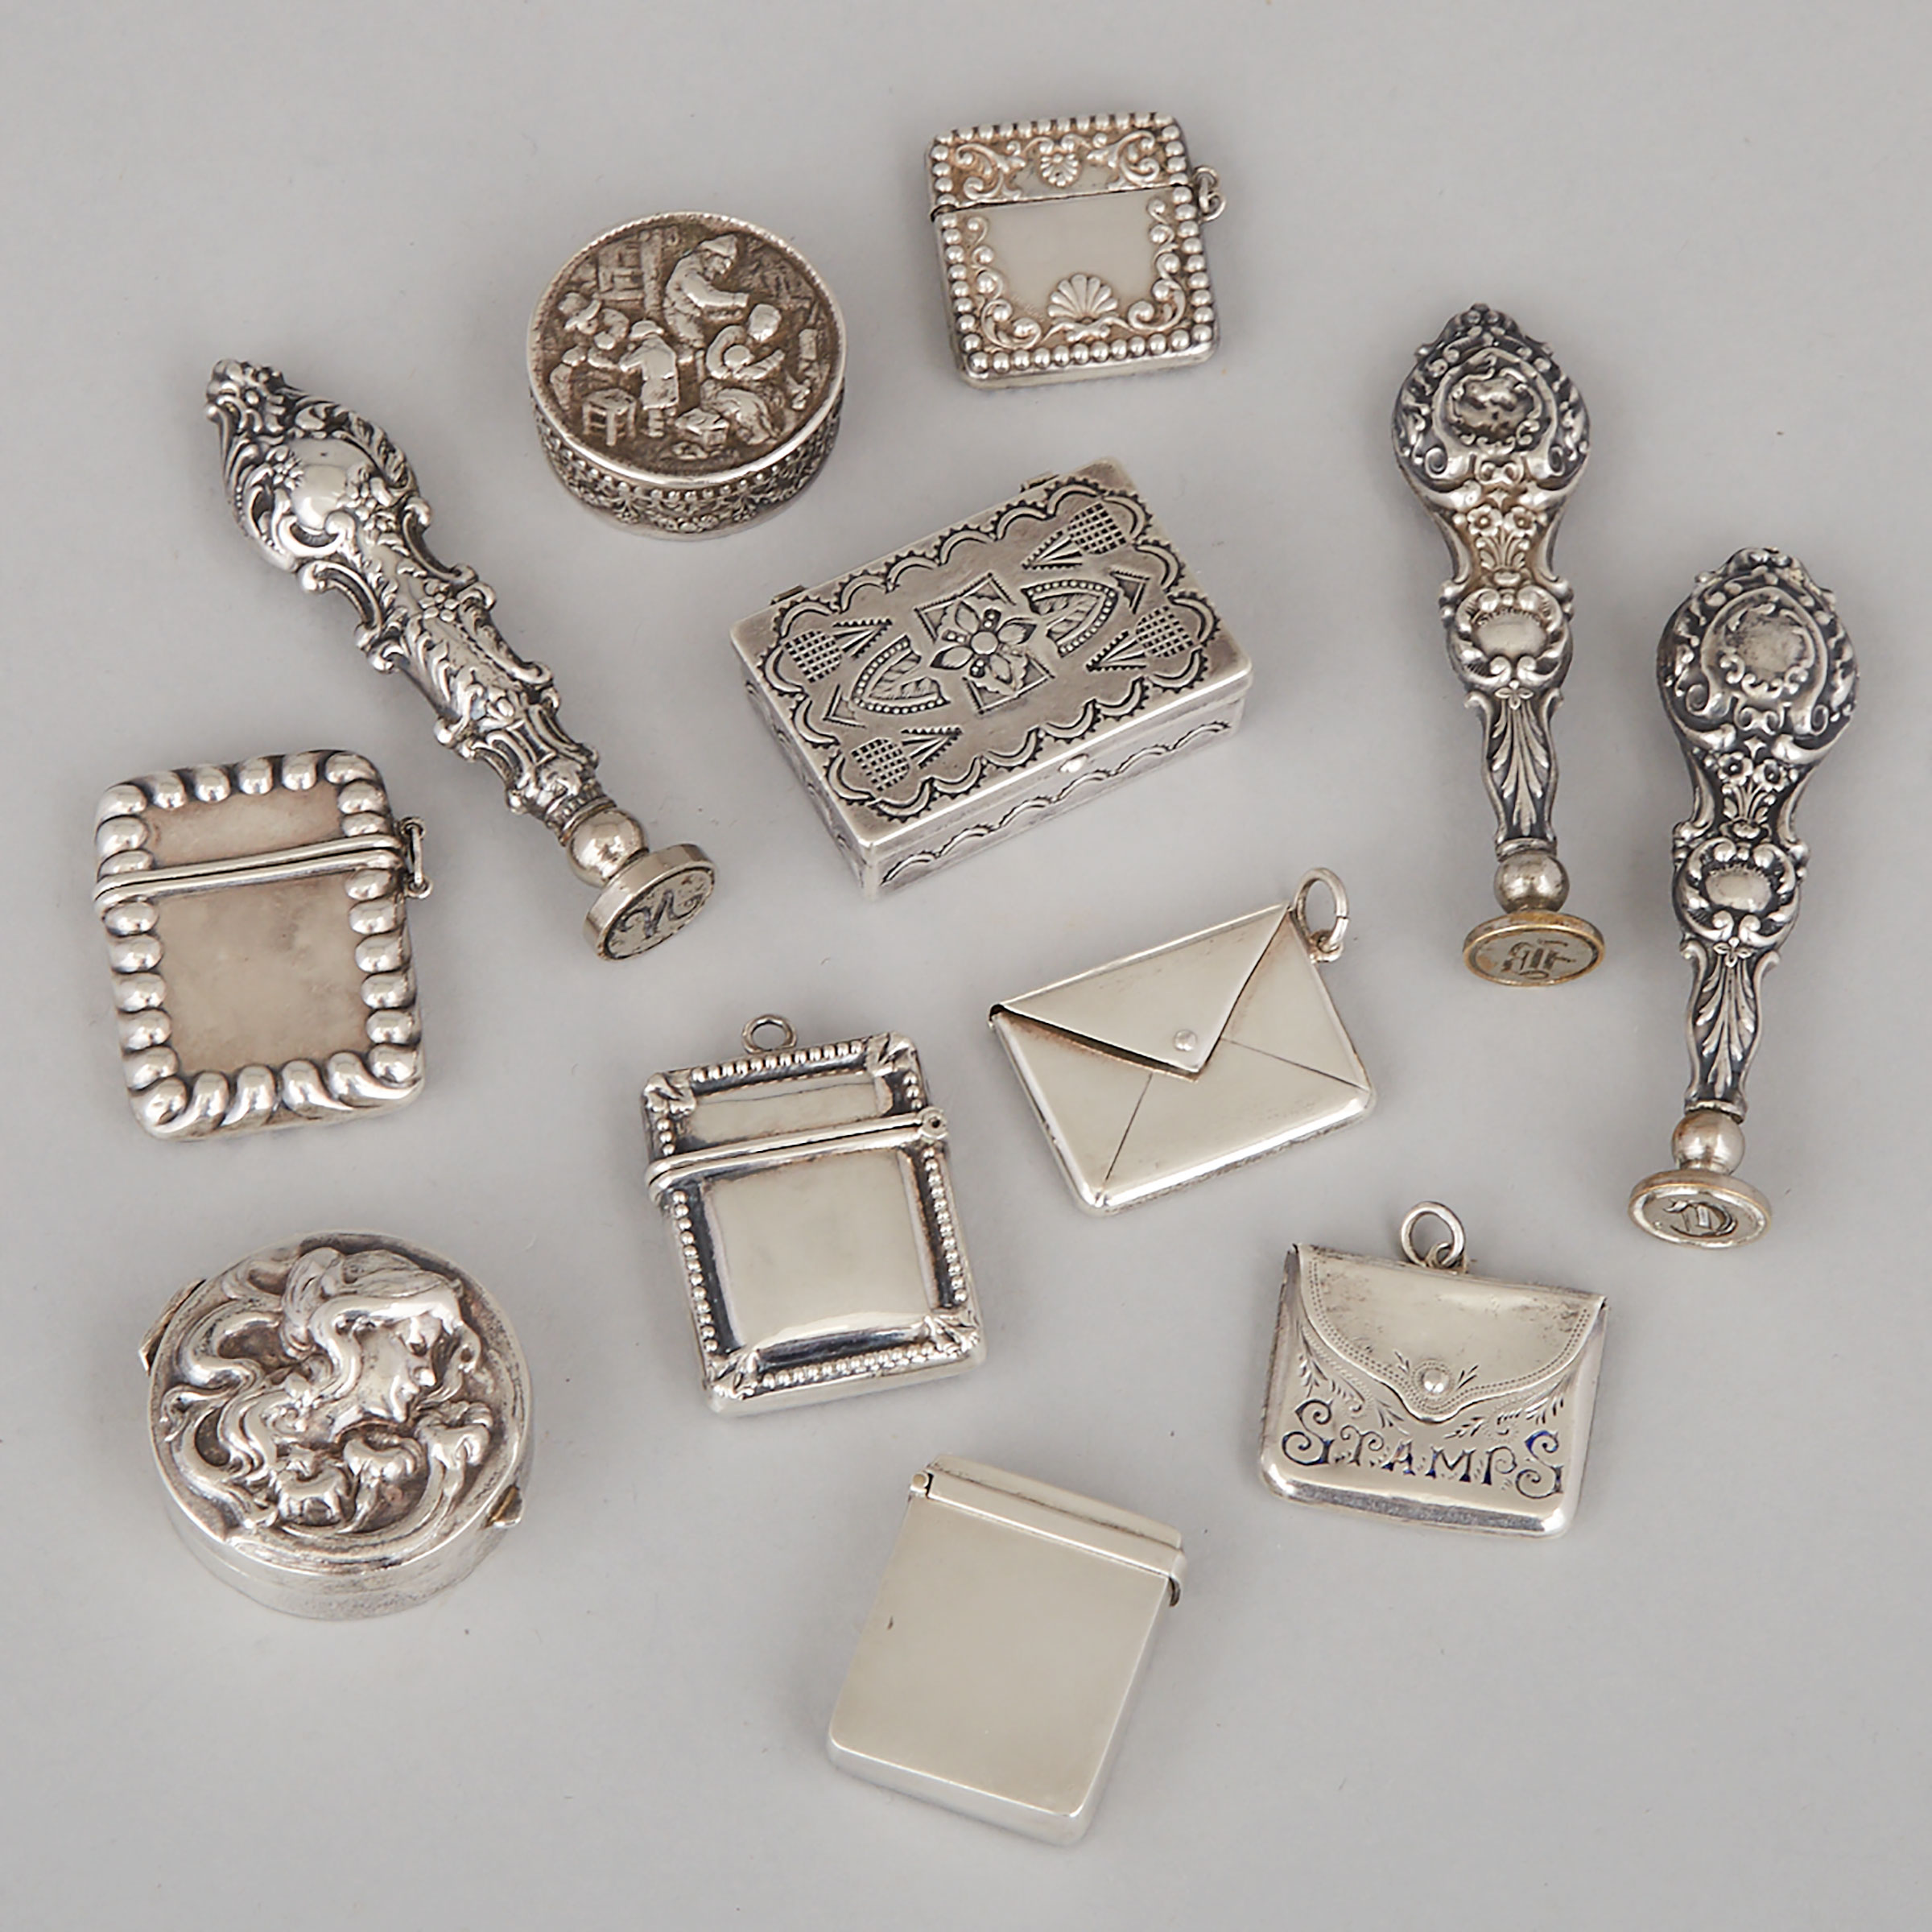 Nine Mainly American Silver Small Boxes and Three Desk Seals, 20th century